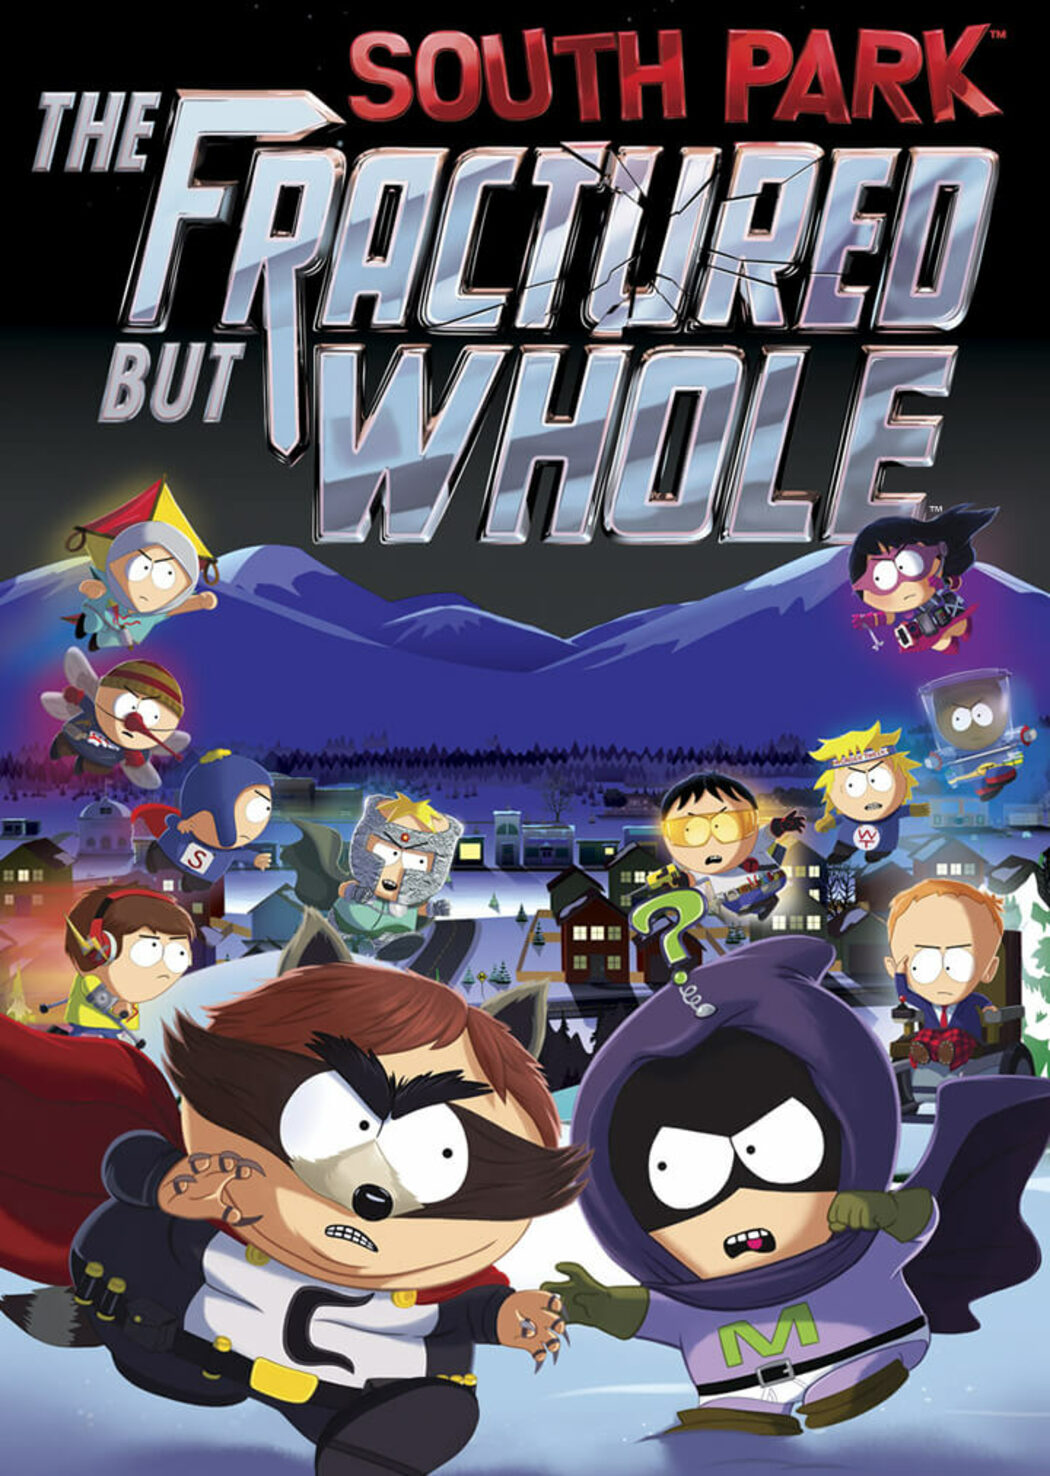 South park the fractured but whole купить ключ steam дешево фото 5